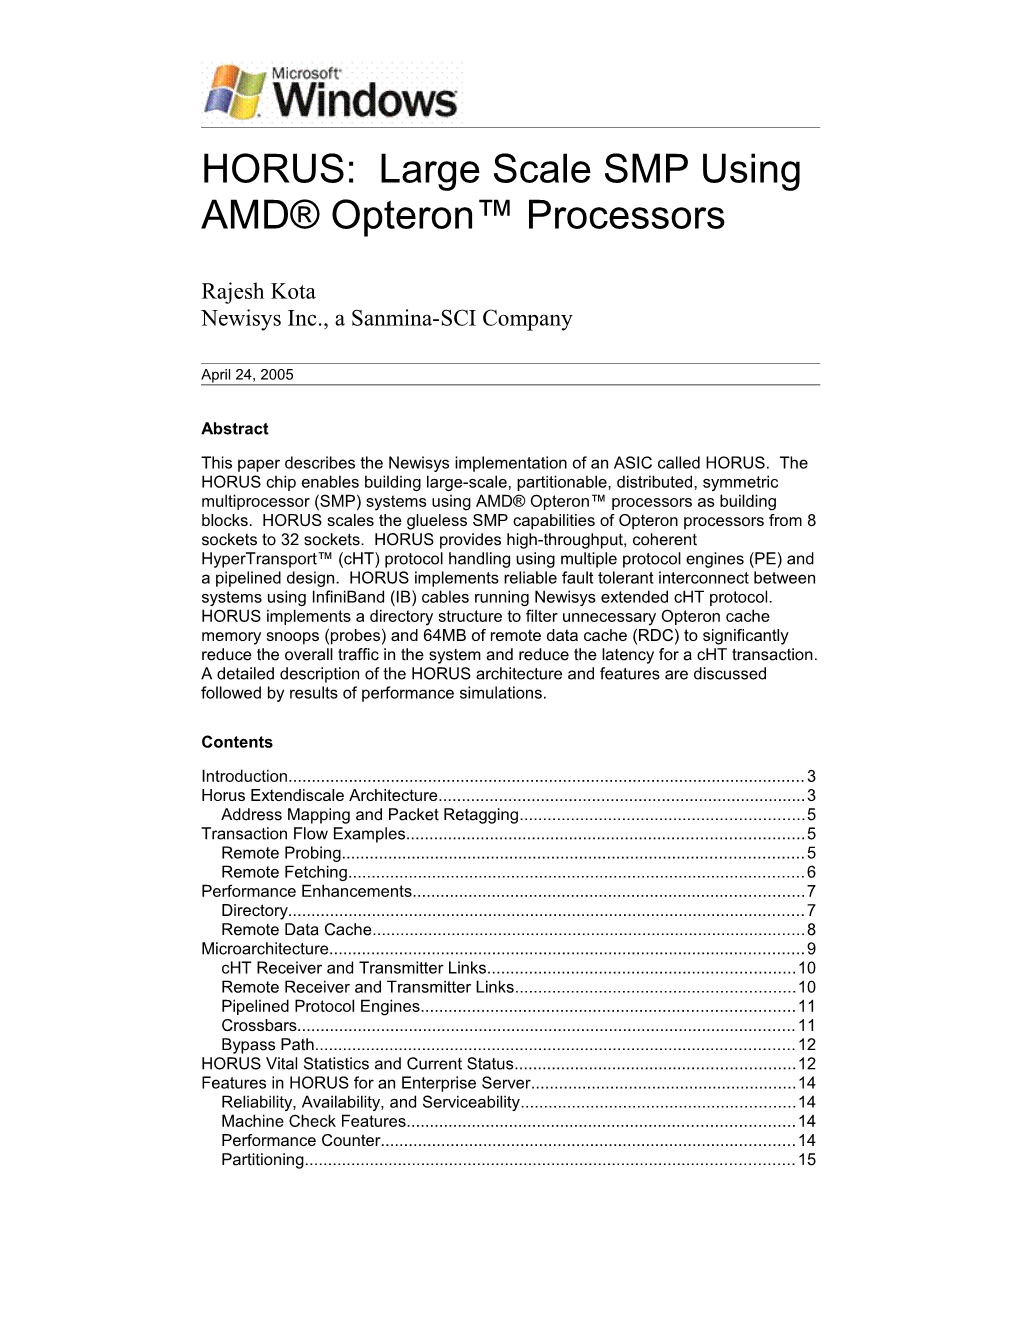 HORUS: Large Scale SMP Using AMD Opteron Processors